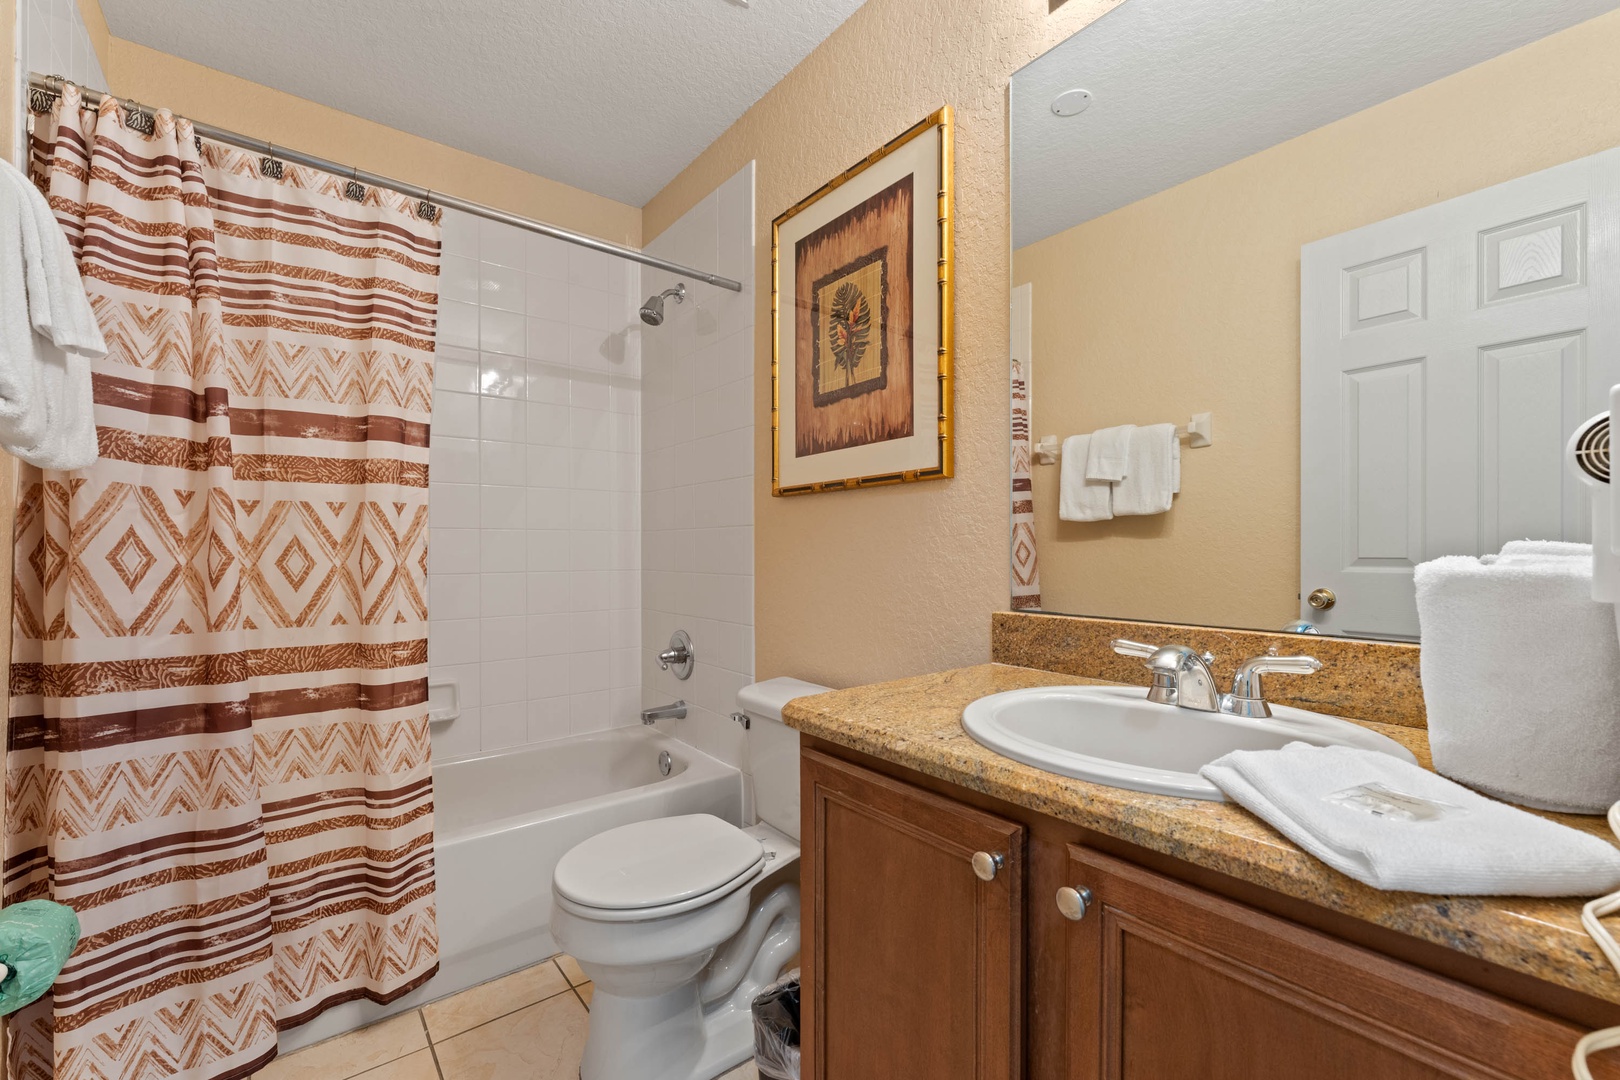 The 2nd floor shared full bathroom offers a single vanity & shower/tub combo